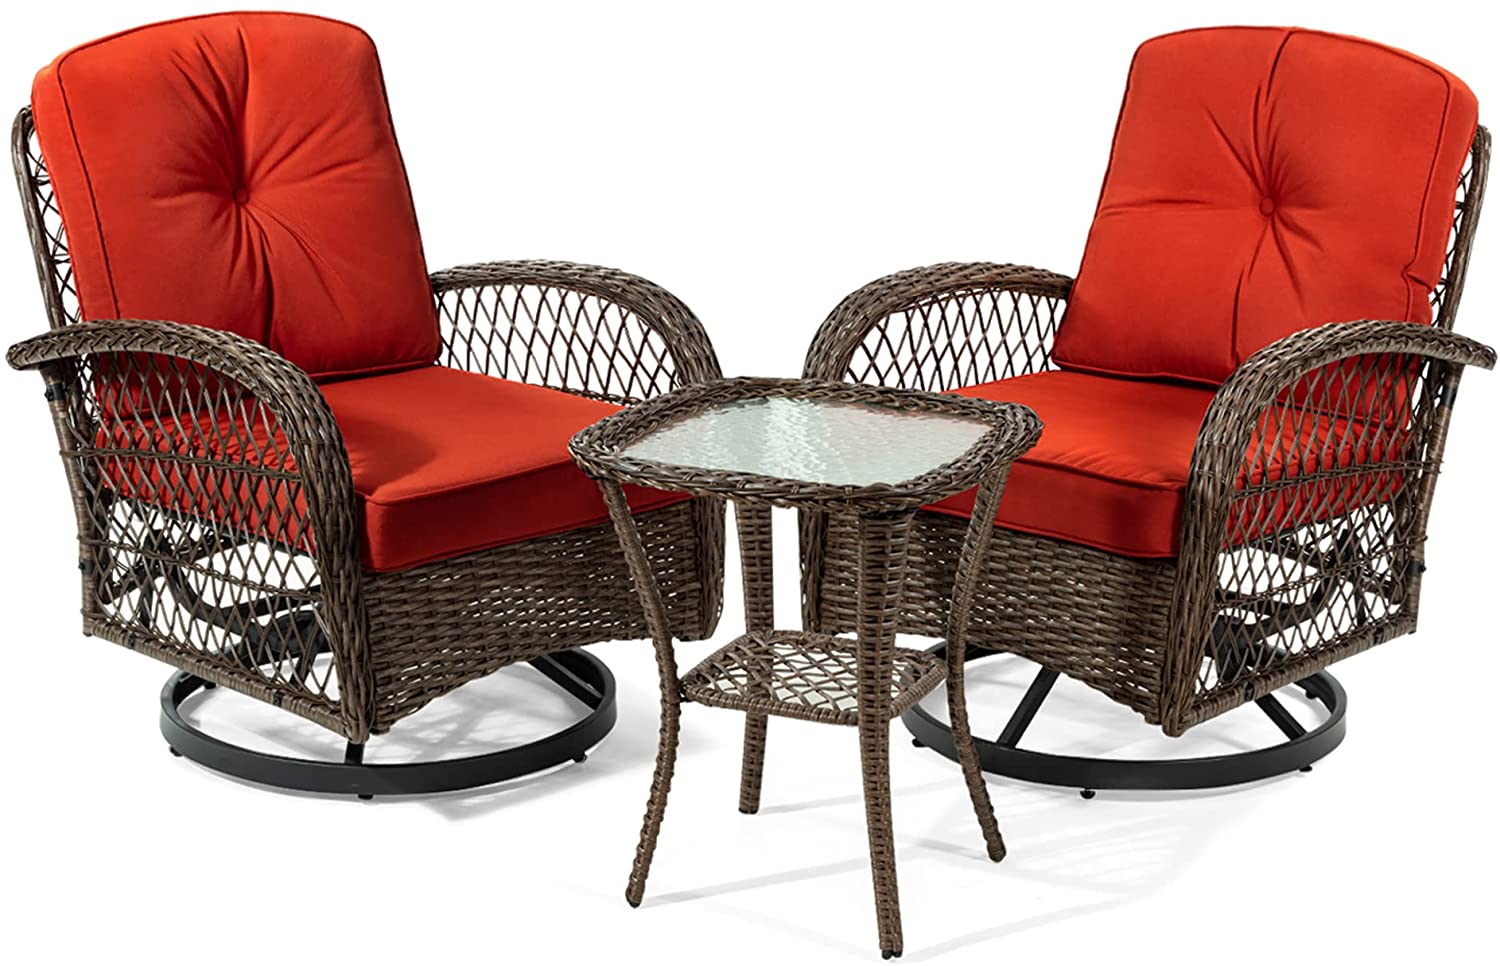 Amolife 3 Pieces Wicker Patio Furniture Set, Bistro Set with Outdoor Swivel Rocking Chair and Coffee Table, Red - image 5 of 9